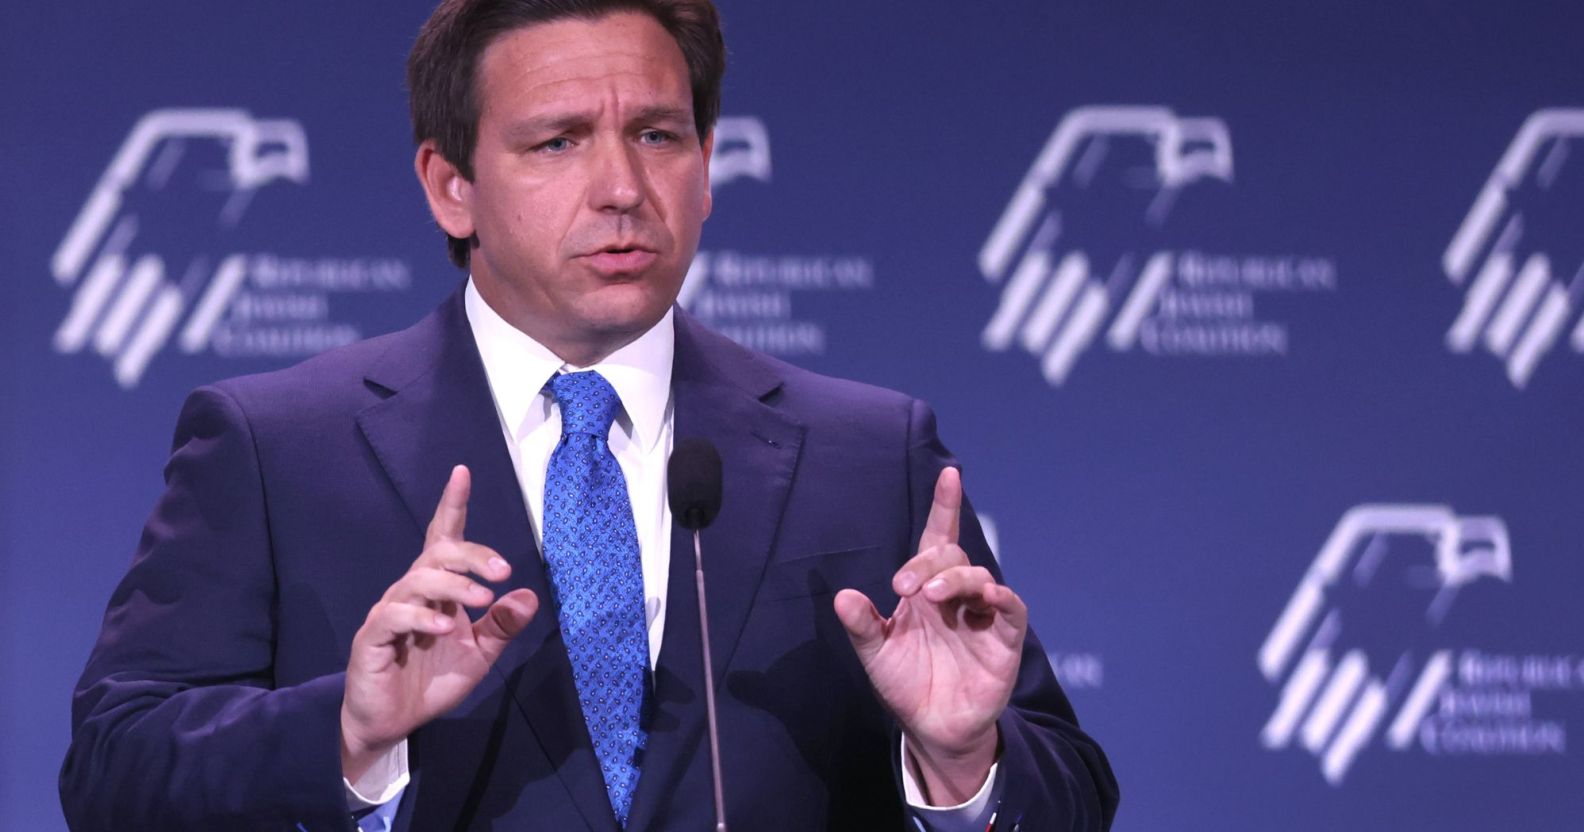 Florida governor Ron DeSantis wears a suit and tie as he gestures with one finger raised upwards on both hands during a speech